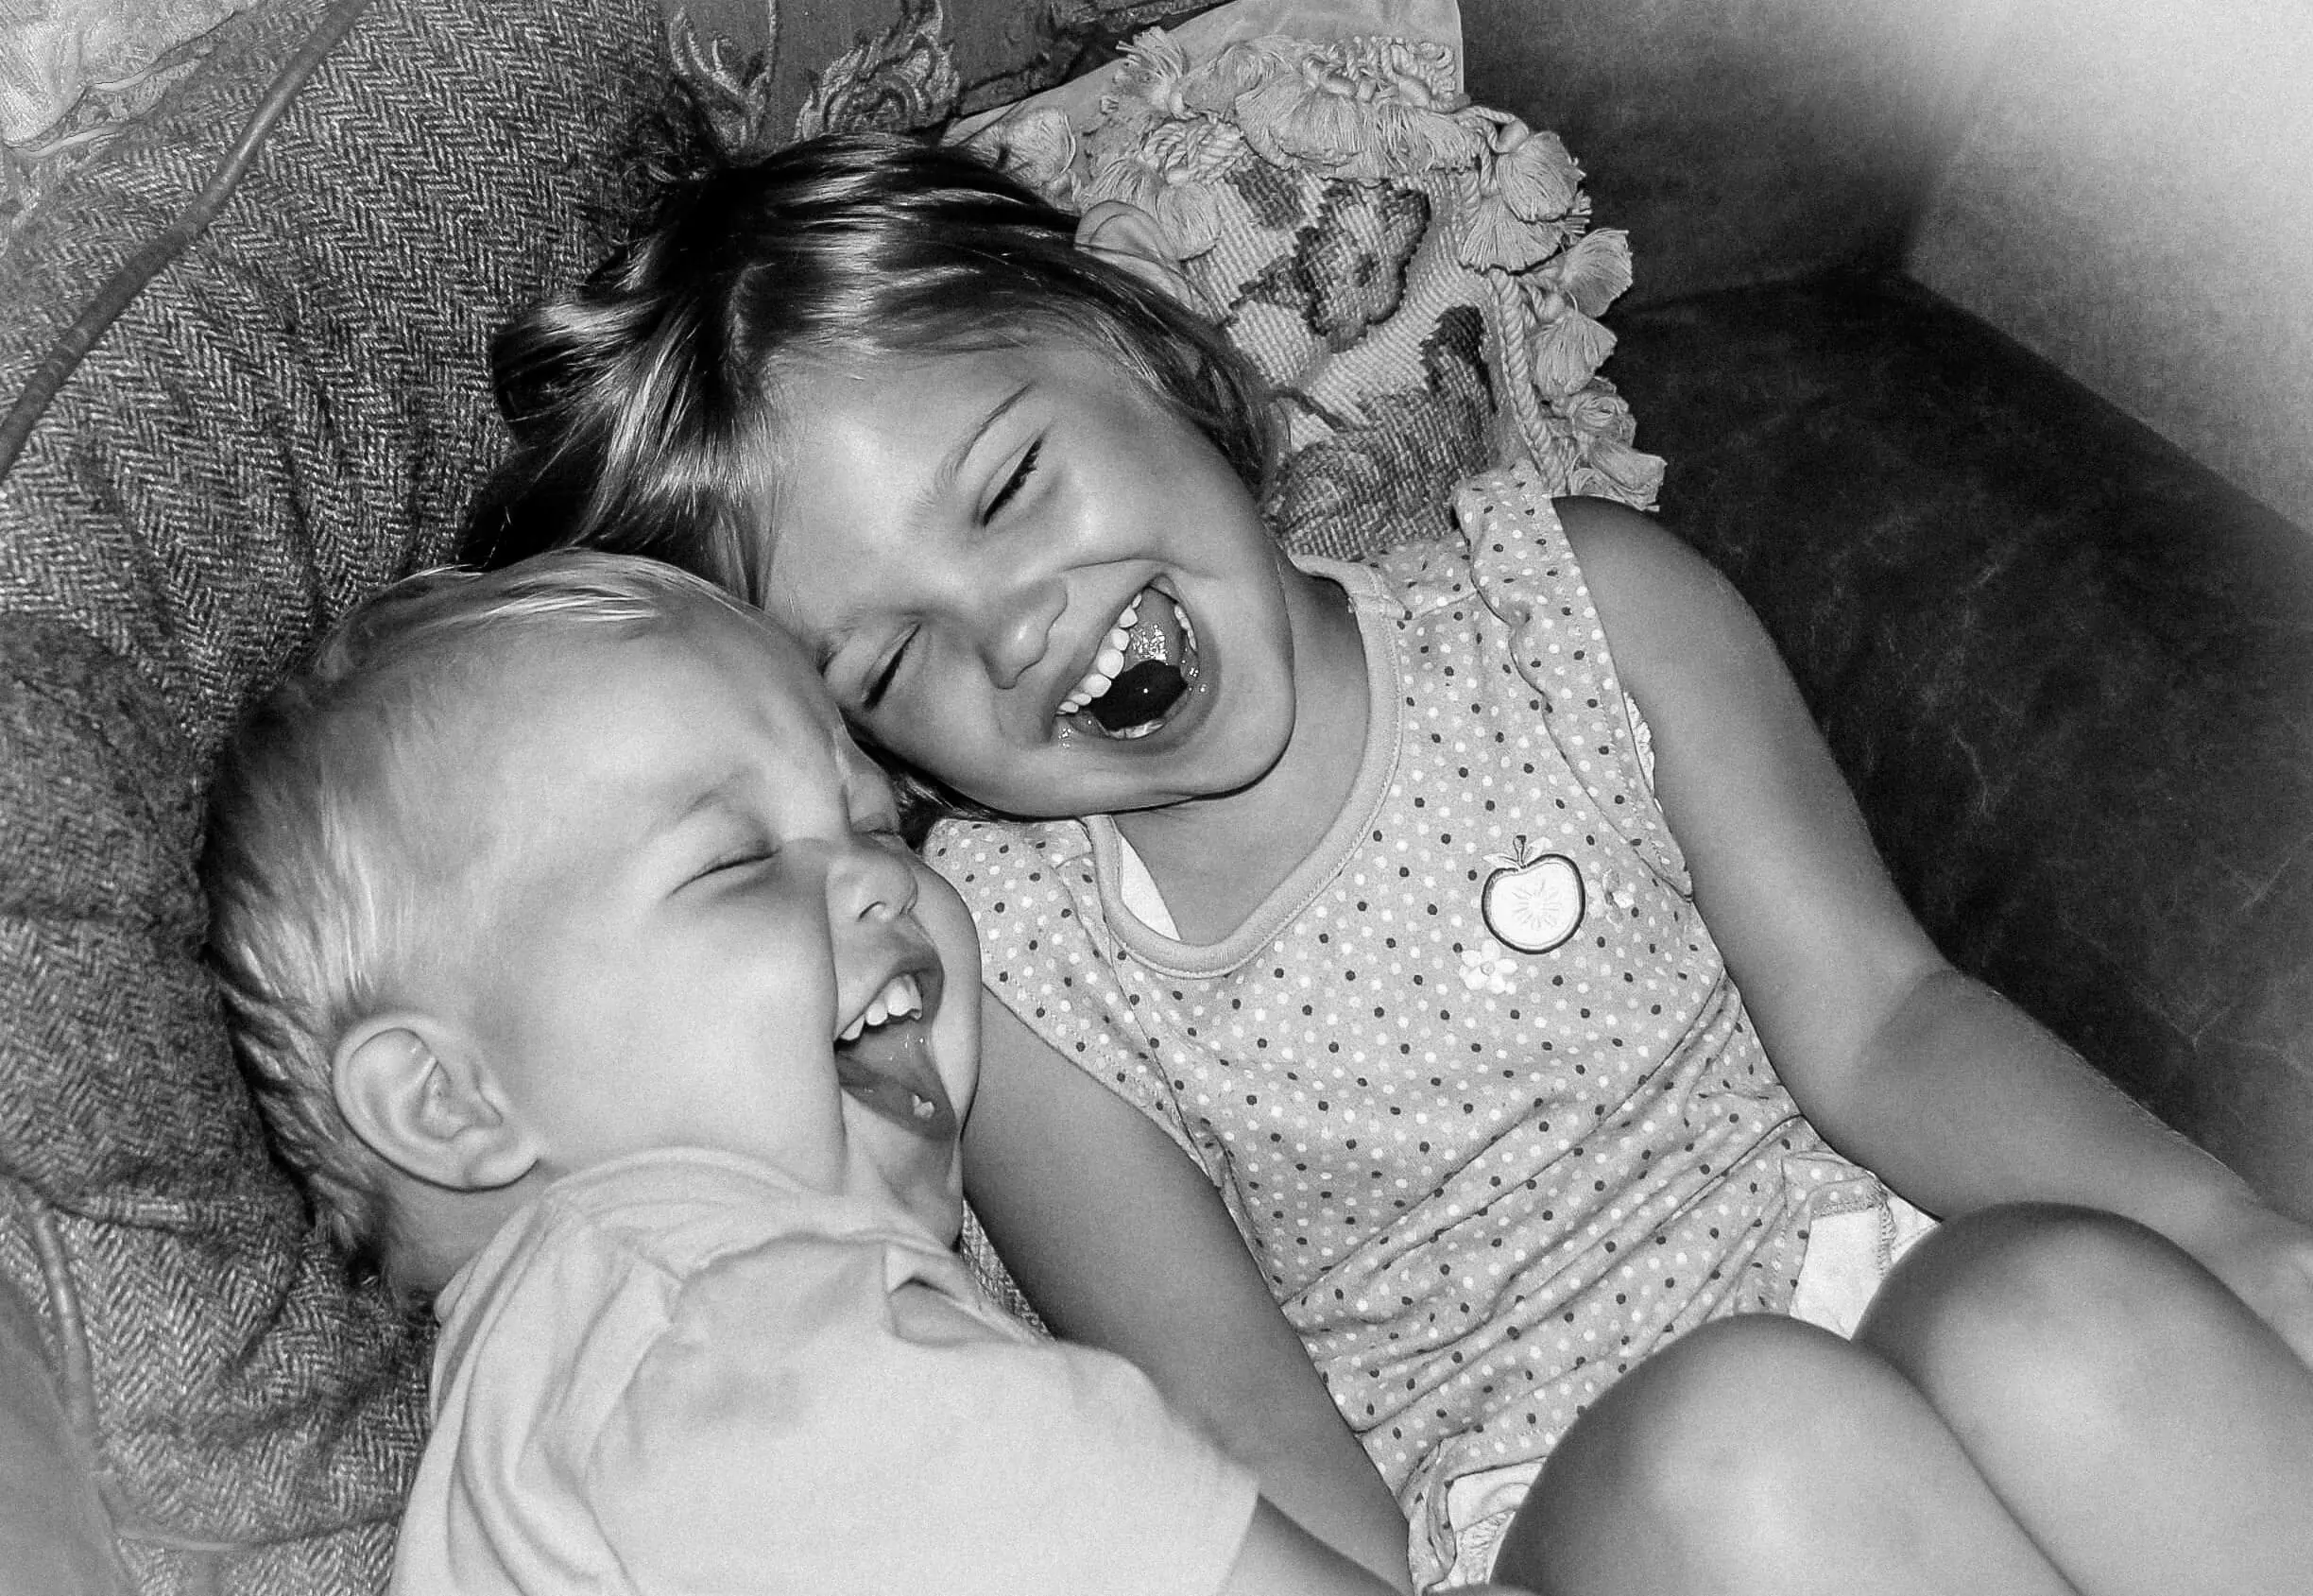 Black and white photo of two white children sitting in a chair giggling with their mouths open and their eyes closed.